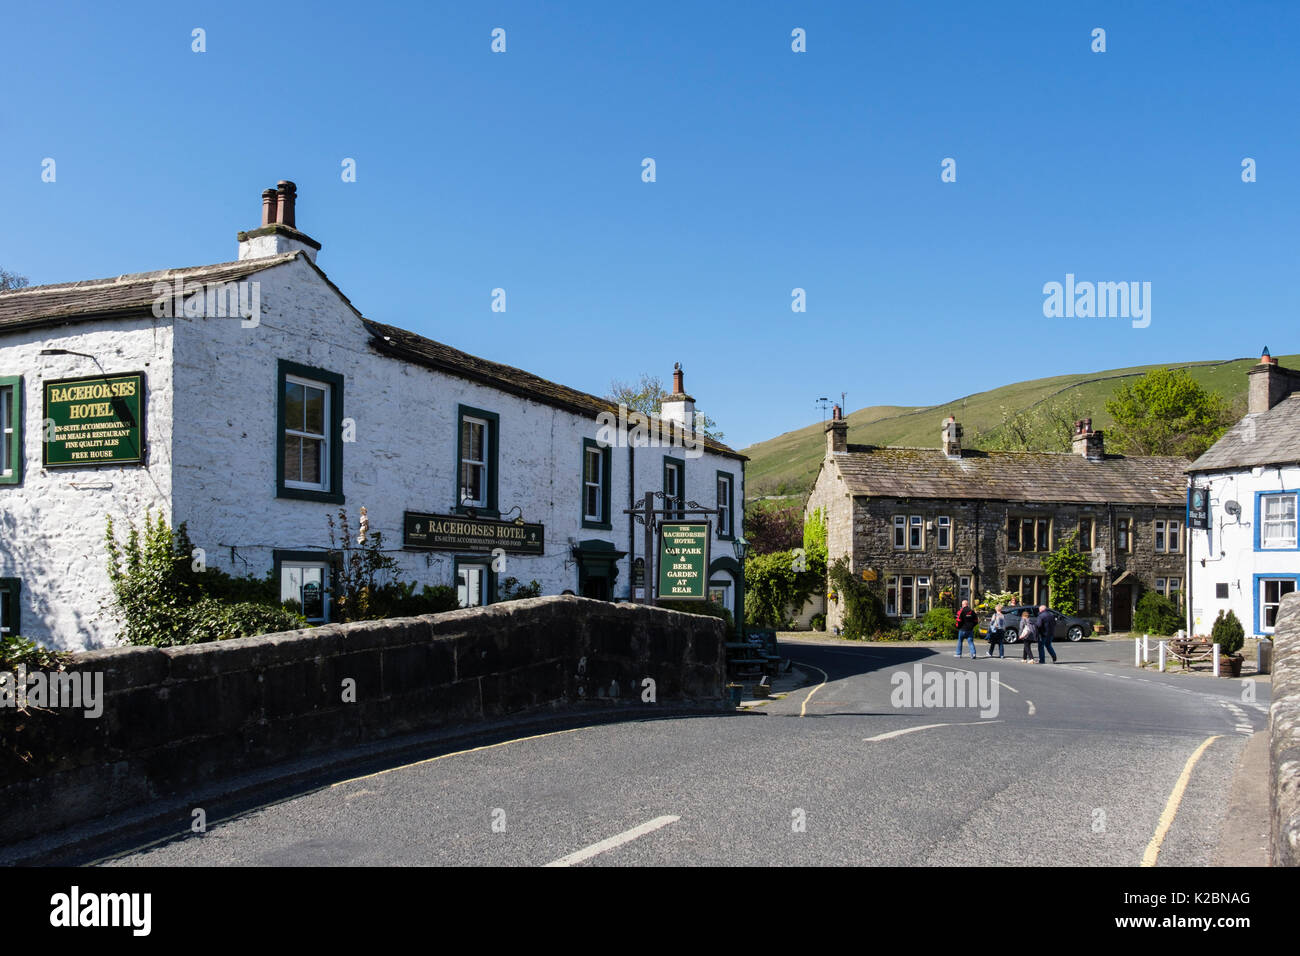 Hotel, pub and old building by bridge in village centre. Kettlewell, Upper Wharfedale, Yorkshire Dales National Park, North Yorkshire, England, UK Stock Photo